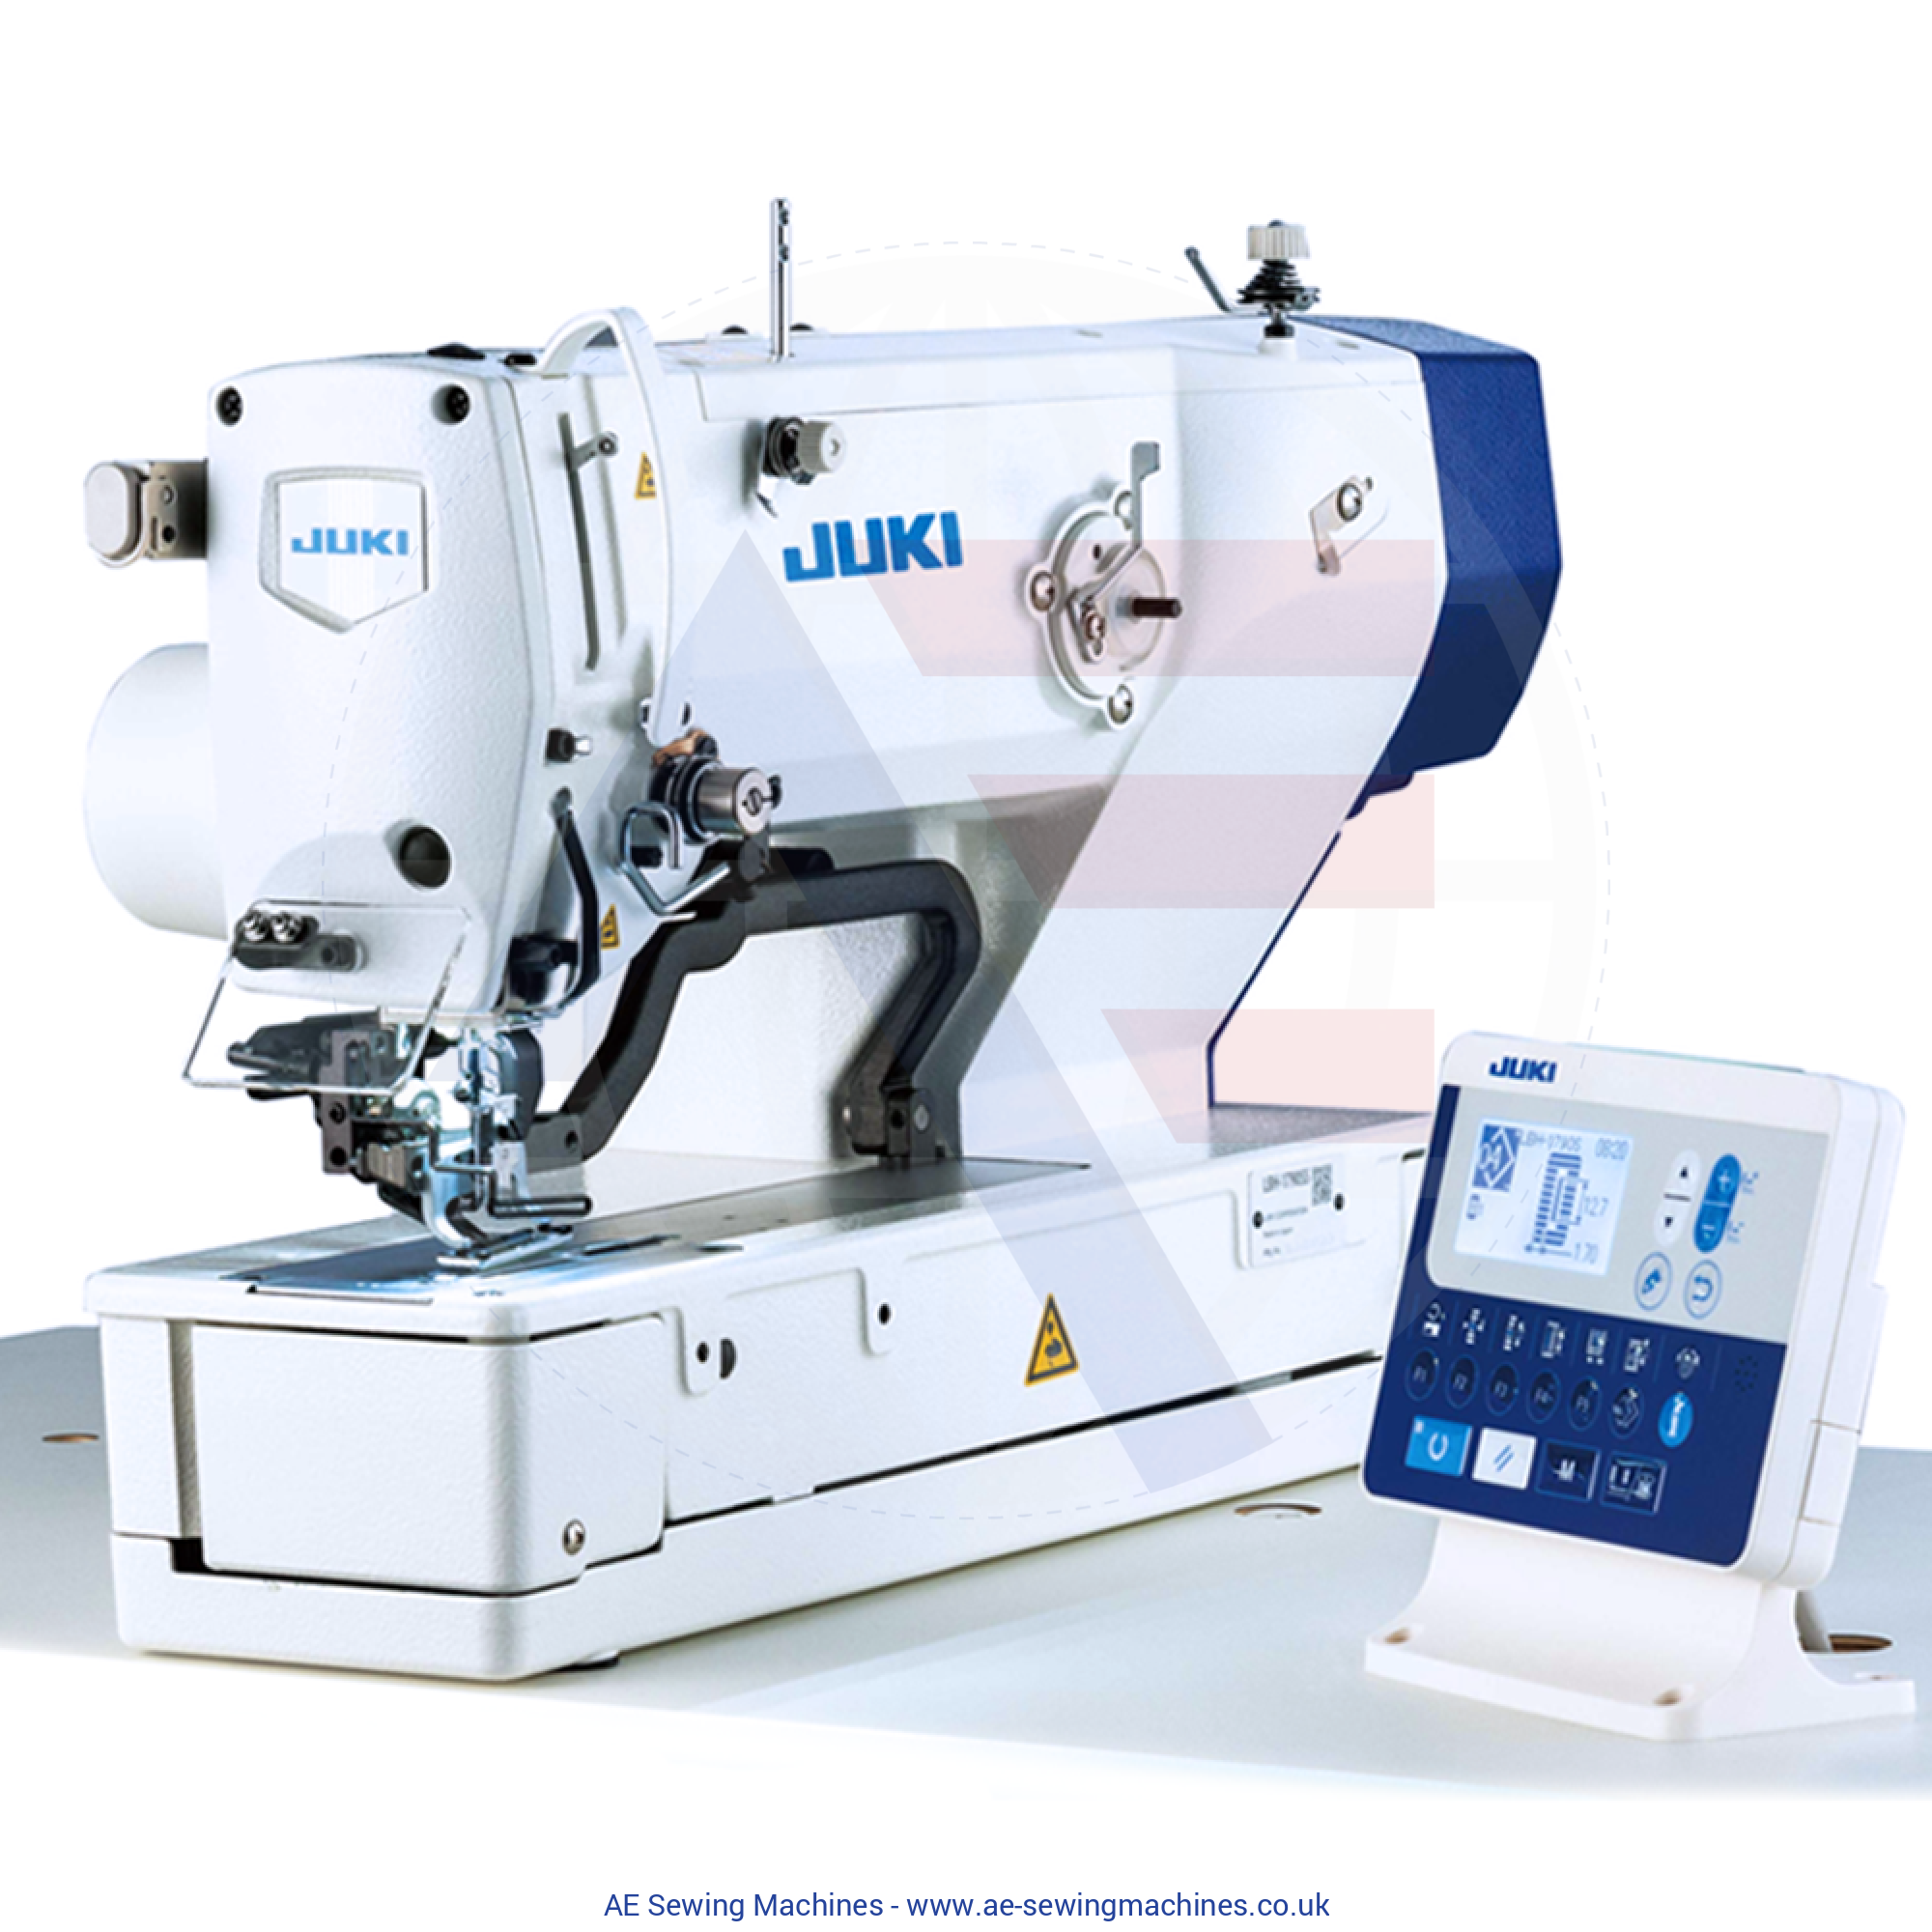 Juki Simply Smart Series Solution Lbh-1790S Computer-Controlled High-Speed Buttonhole Machine Sewing